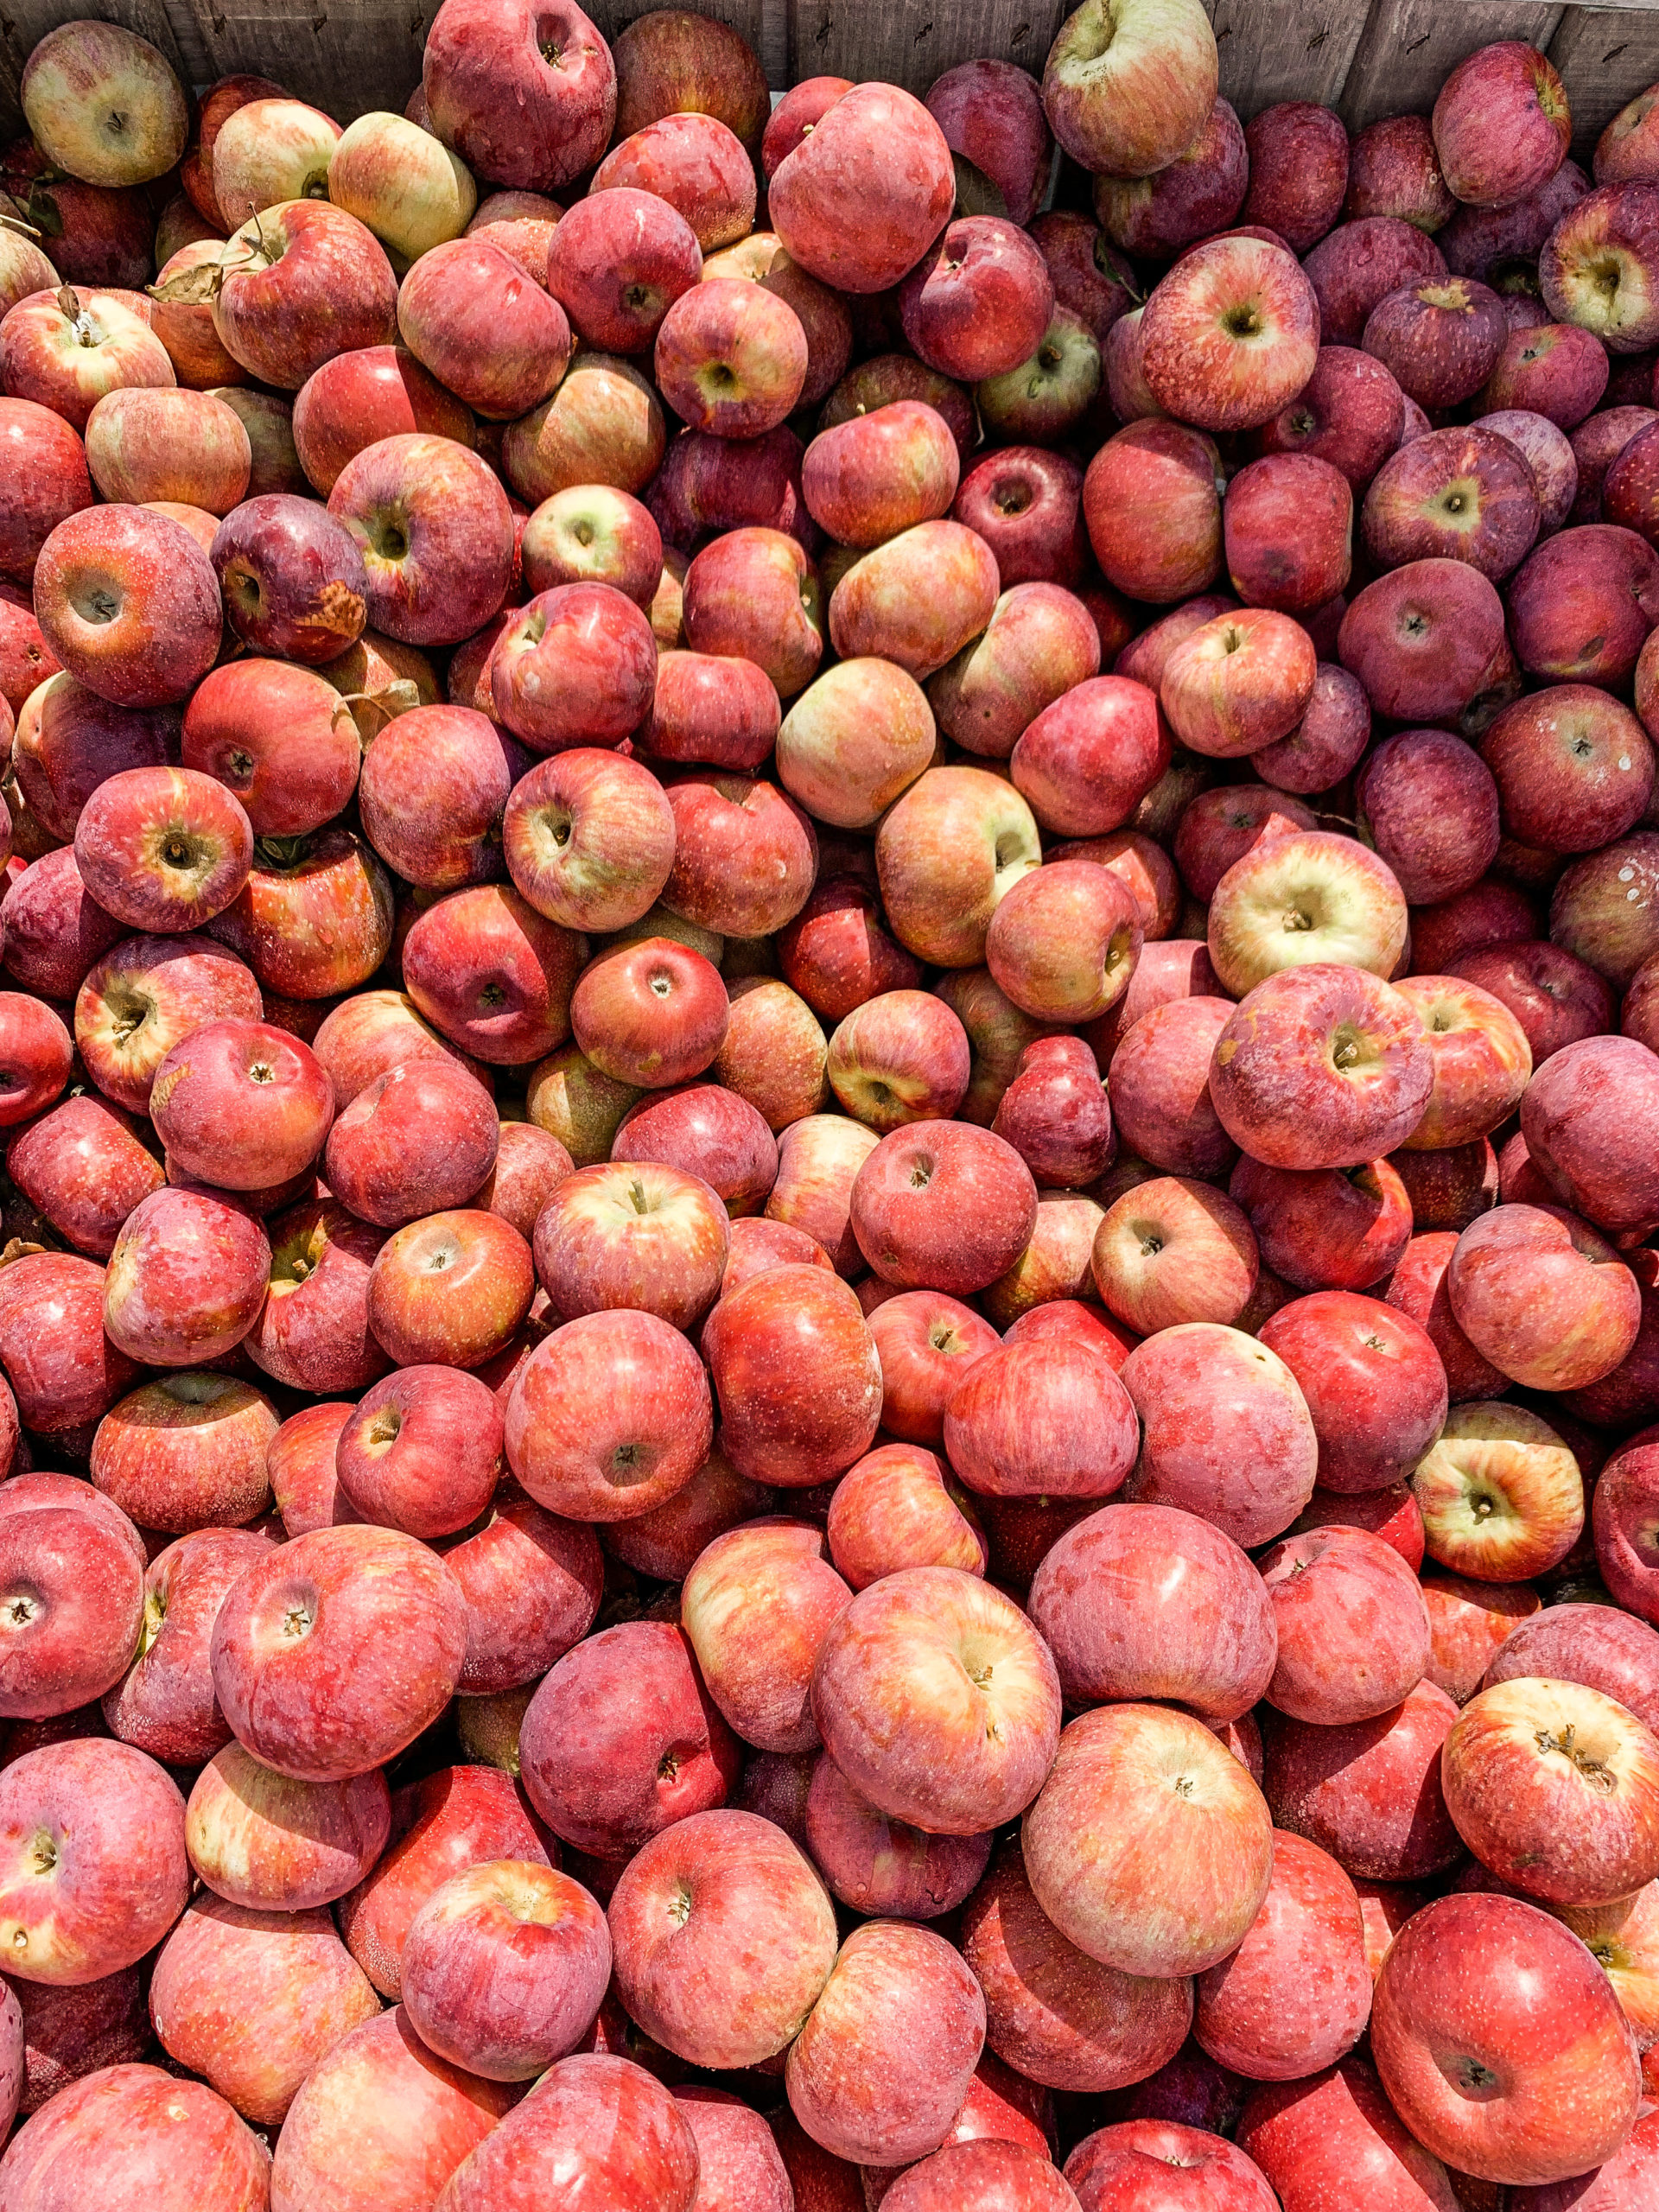 Where to Pick Apples in Central Ohio